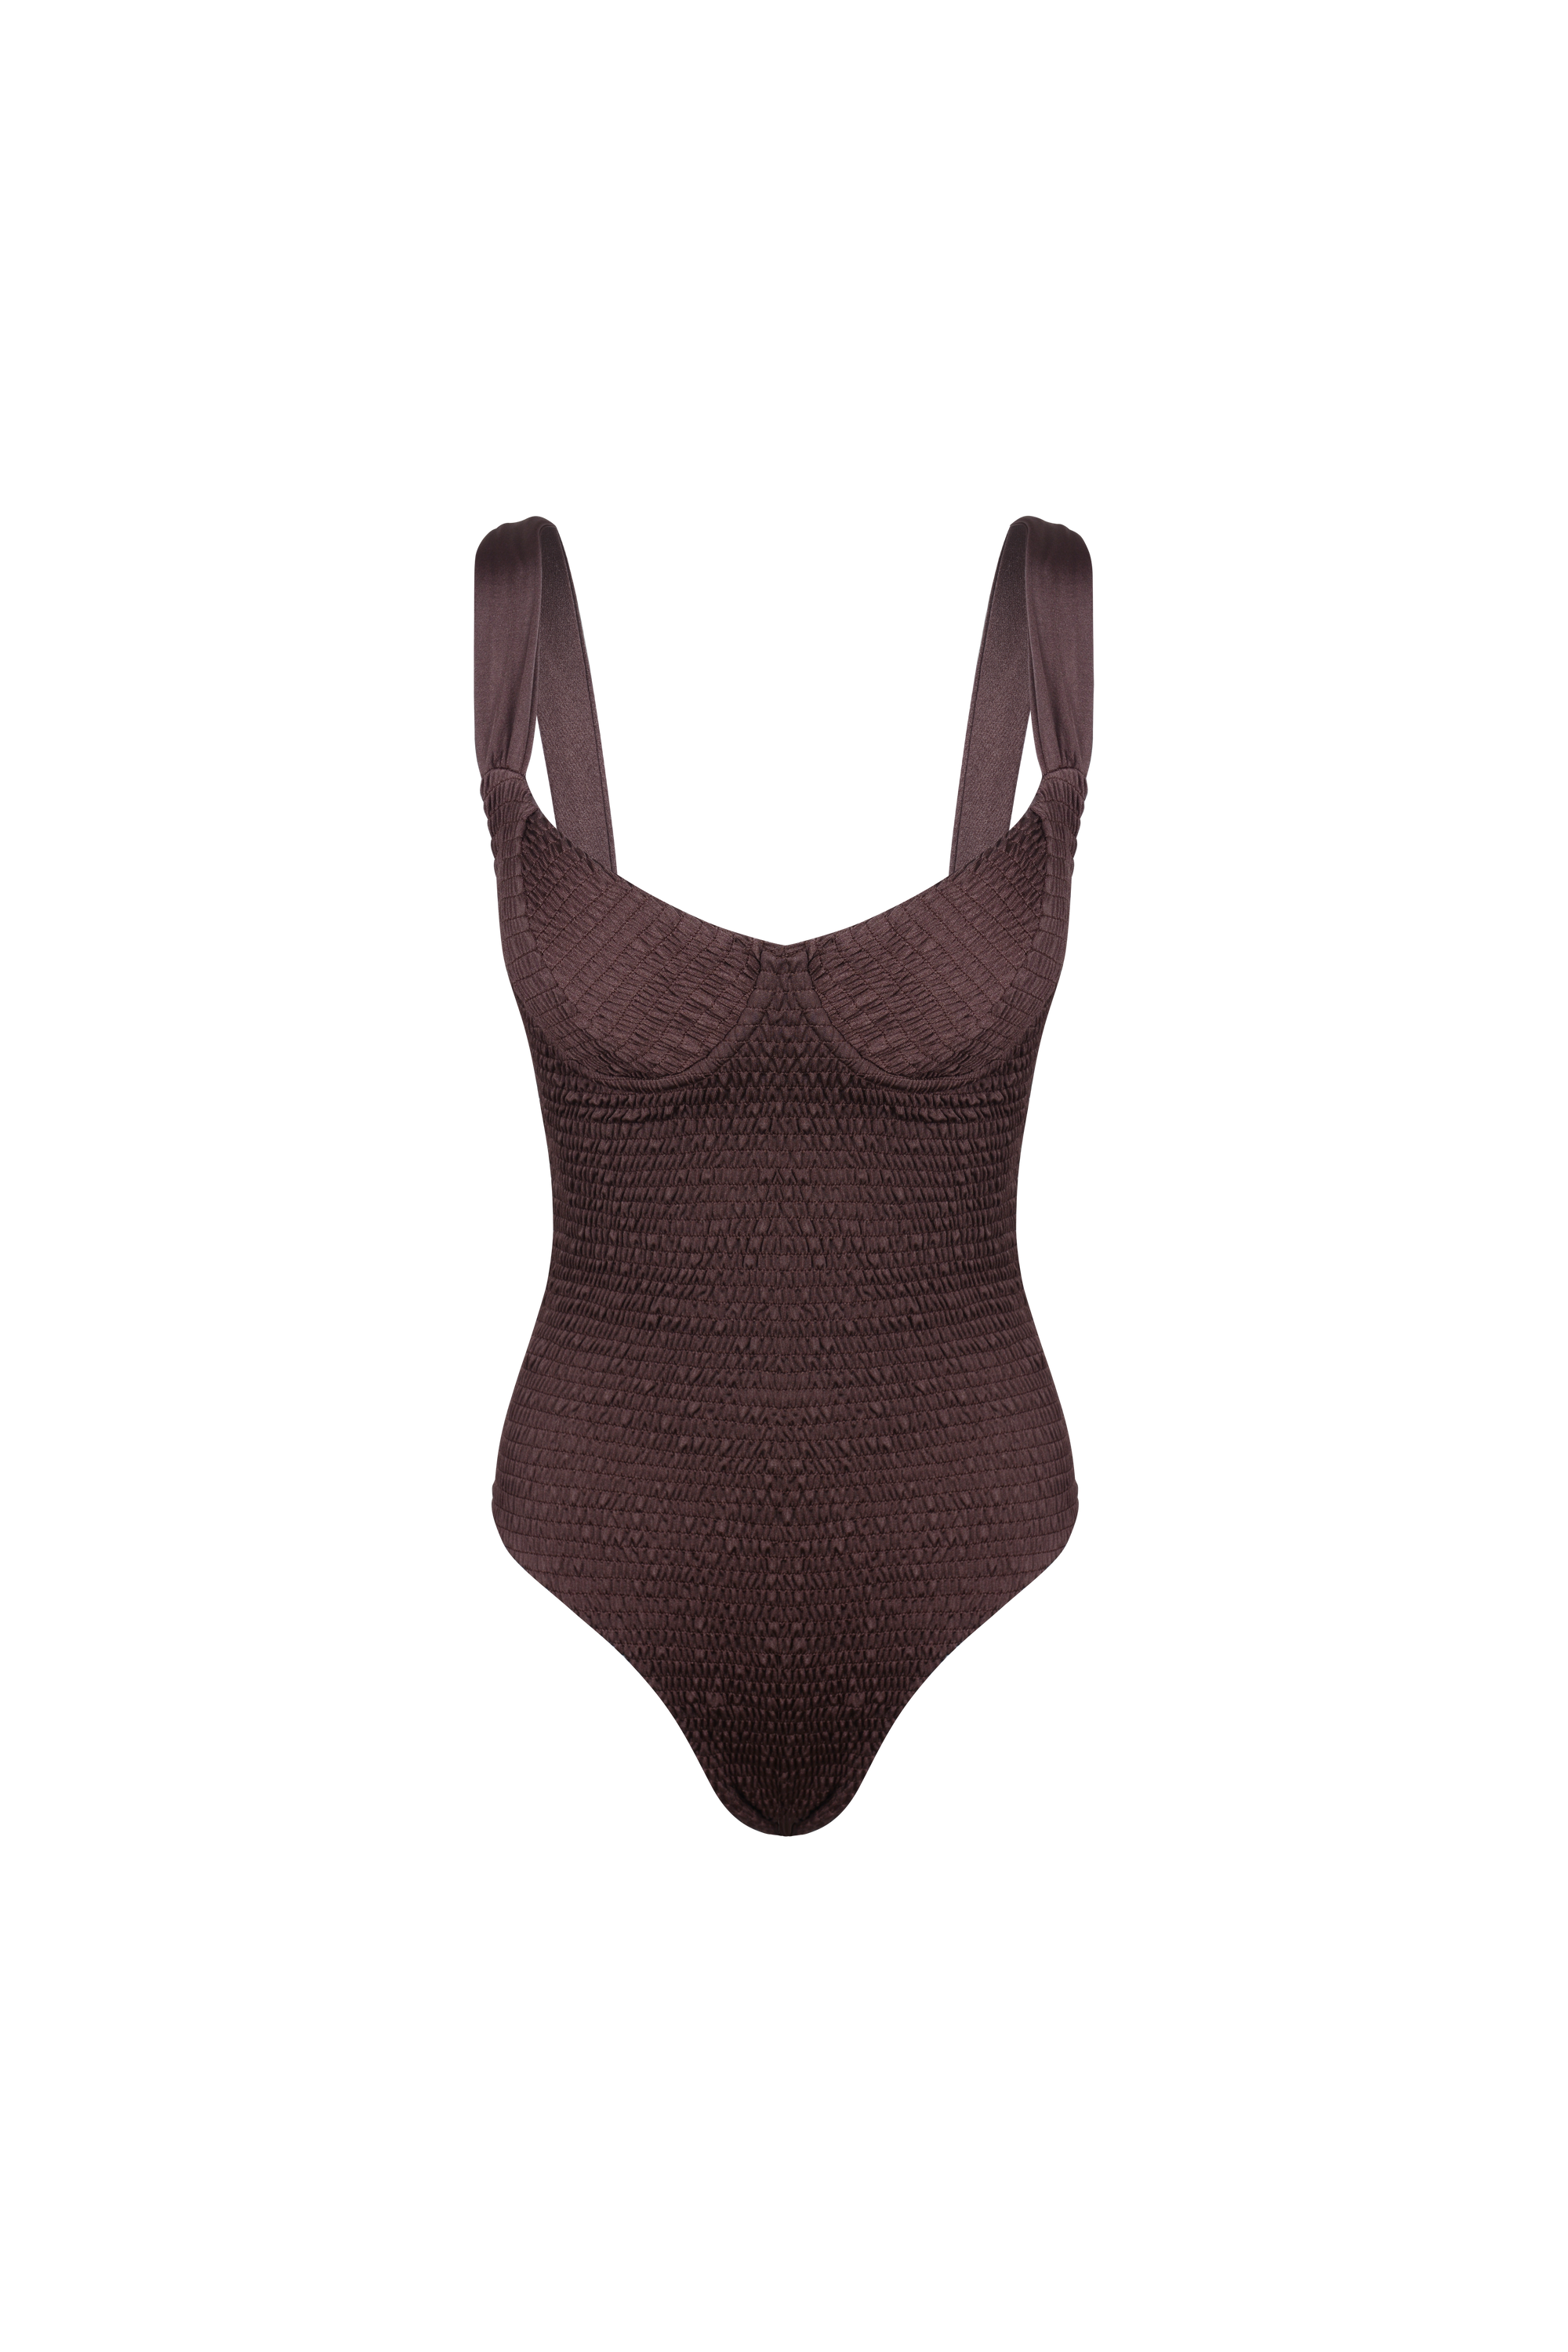 Brown one piece bathing suit on a plain background